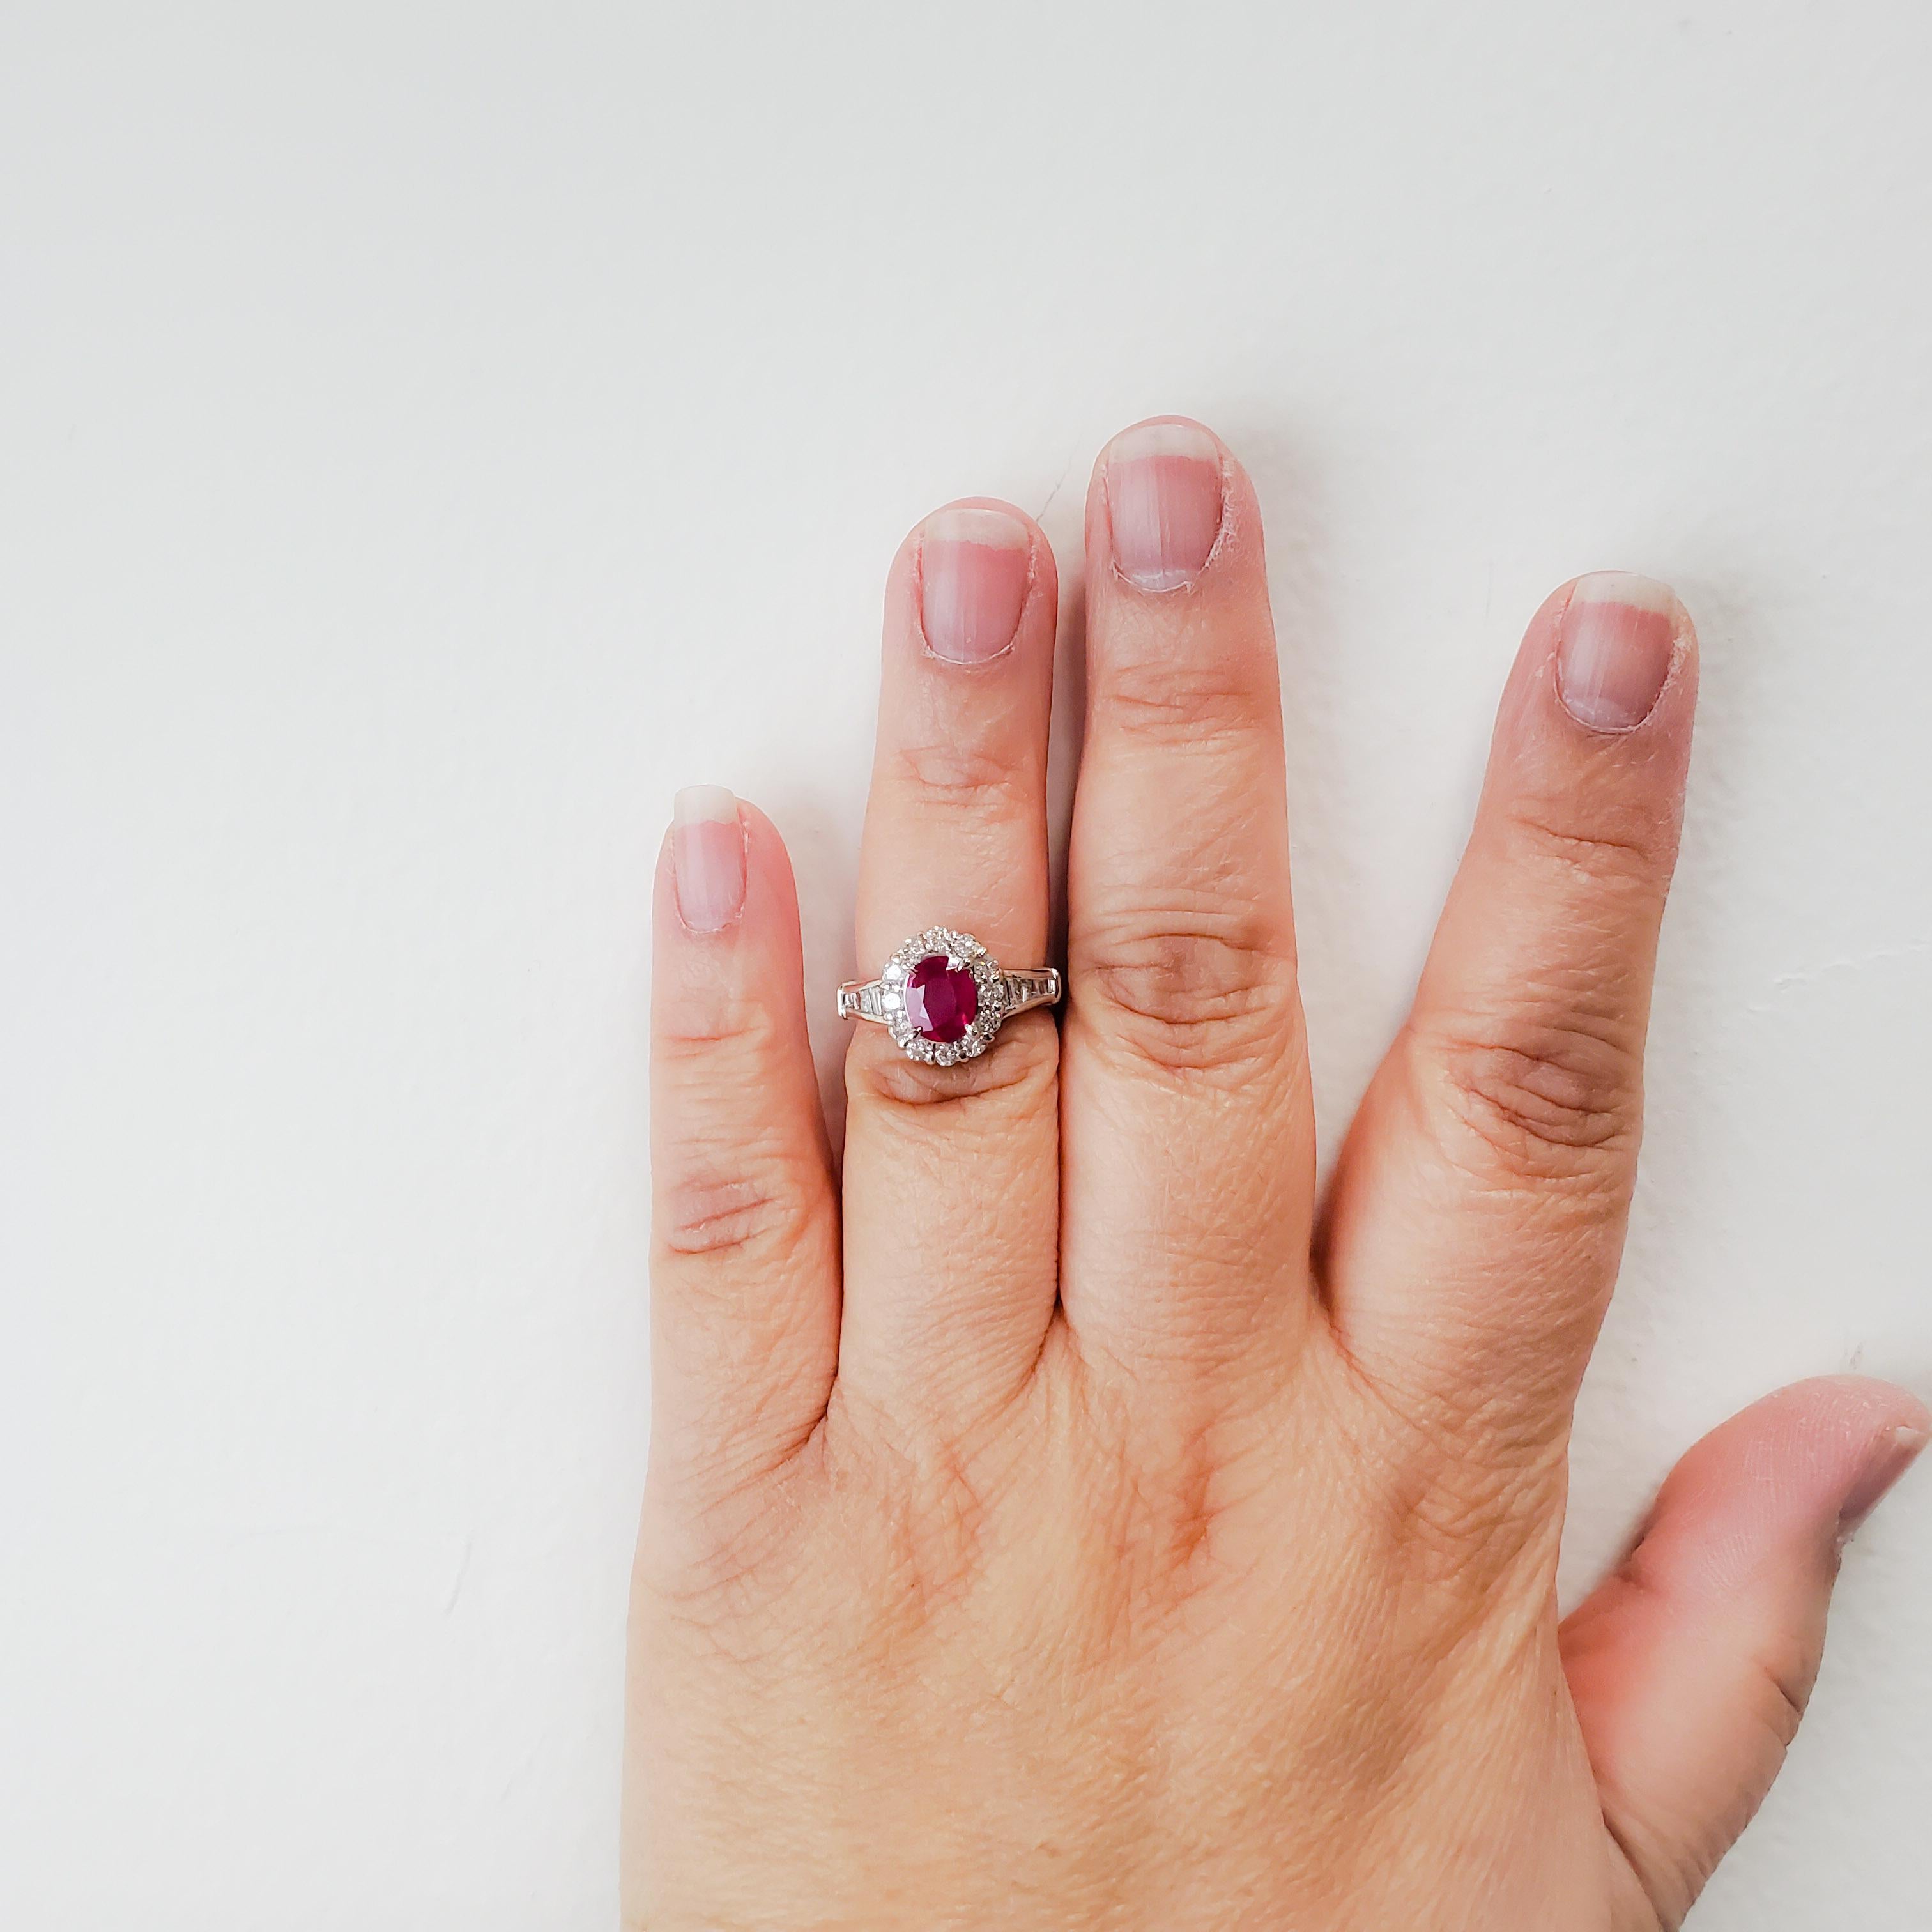 Gorgeous 1.48 ct. ruby oval with 0.77 ct. good quality white diamond rounds and baguettes.  Handmade platinum mounting in ring size 5.75.  